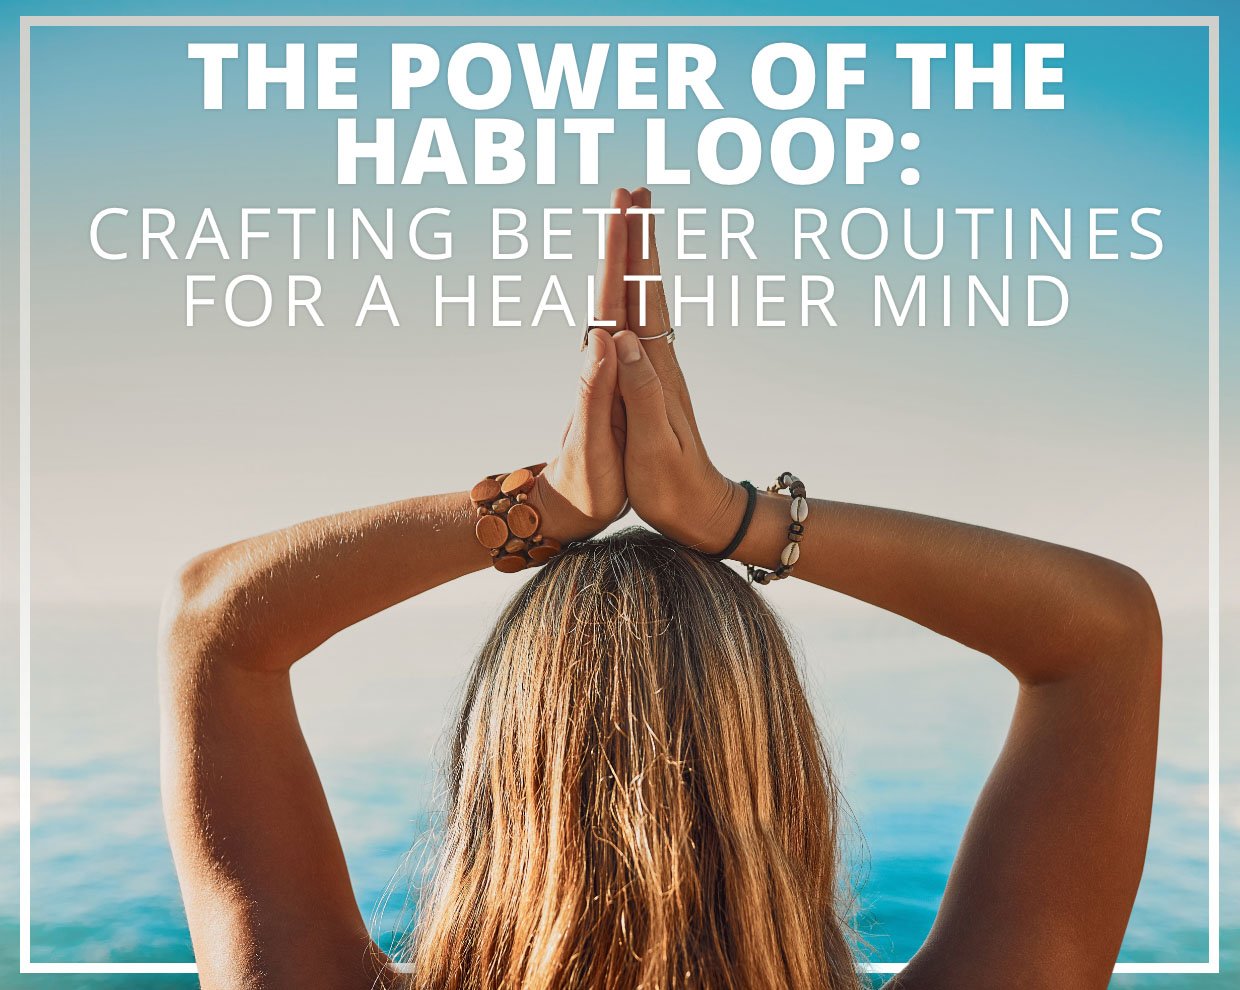 The Power of the Habit Loop: Crafting Better Routines for a Healthier Mind